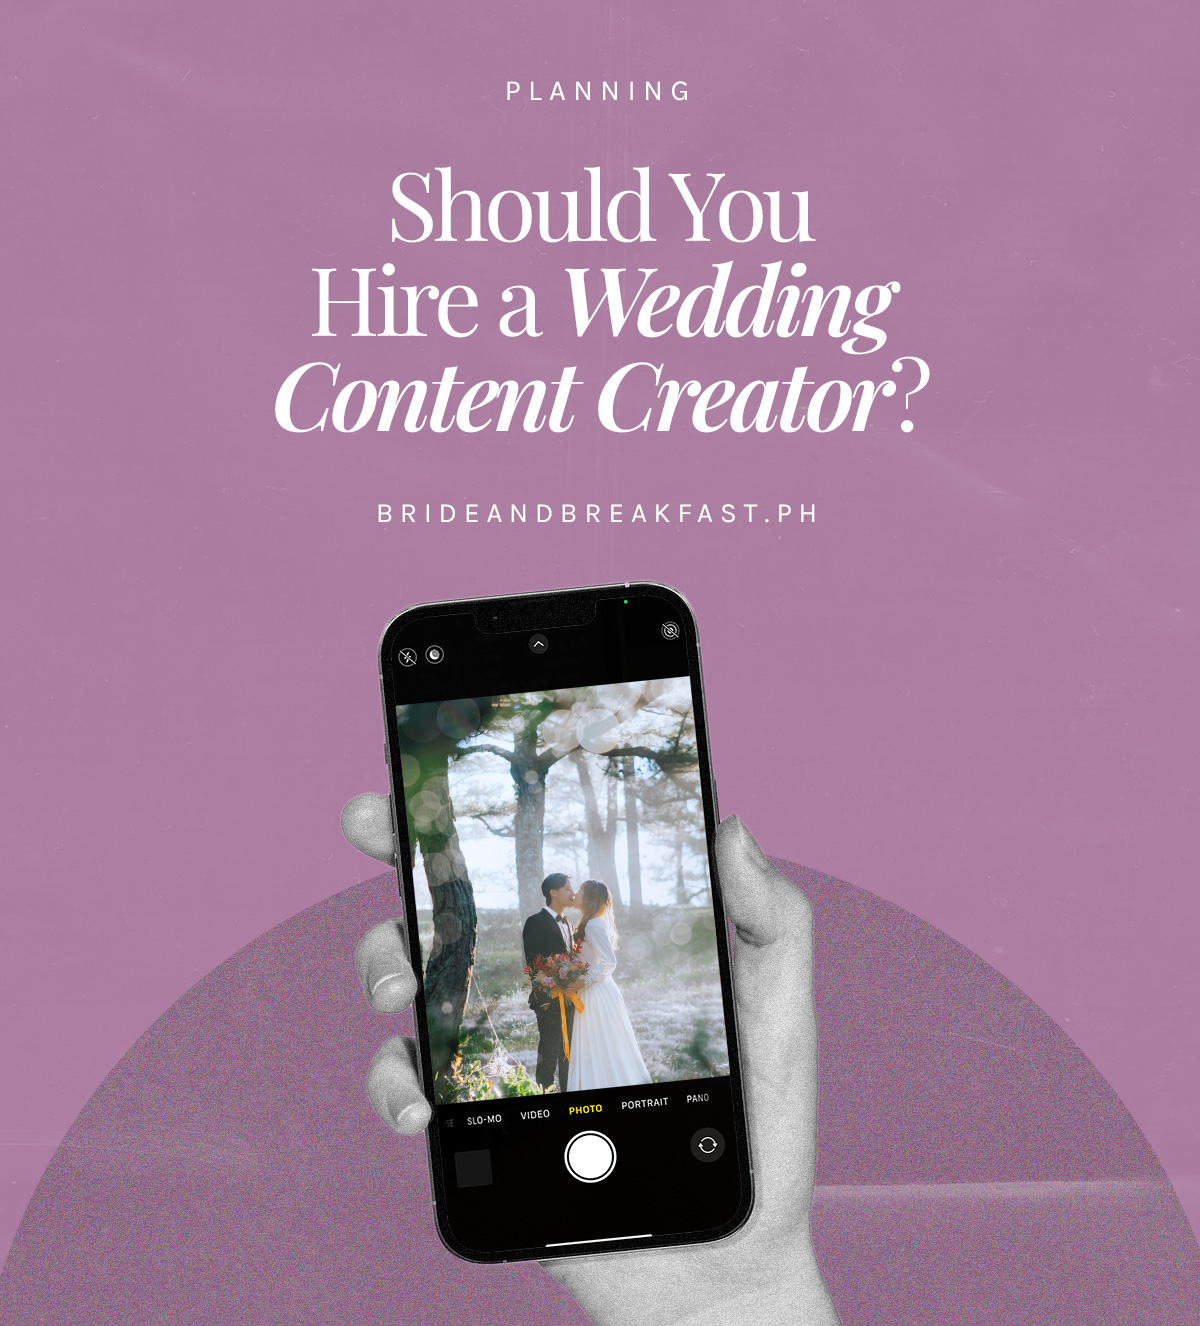 Should your hire a wedding content creator?